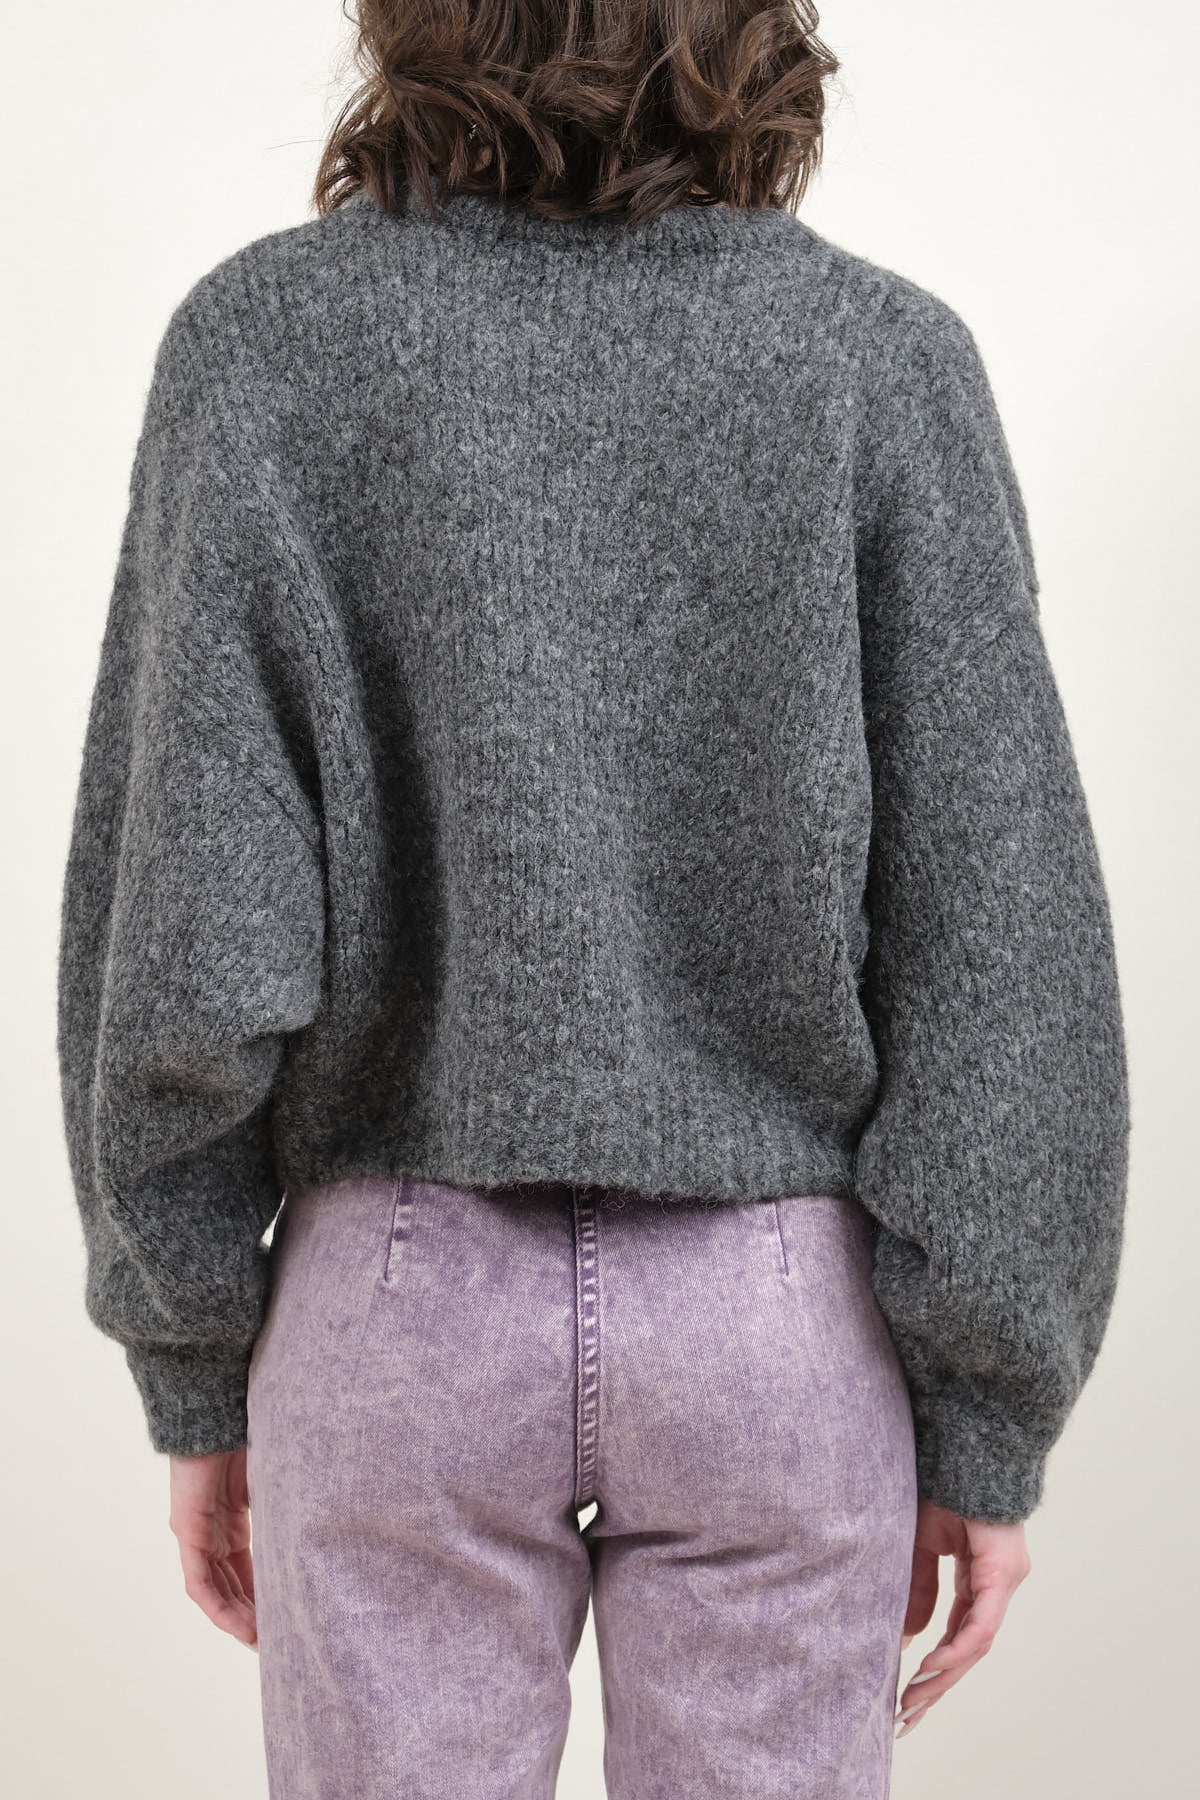 Back of Balloon Sleeve Sweater in Charcoal